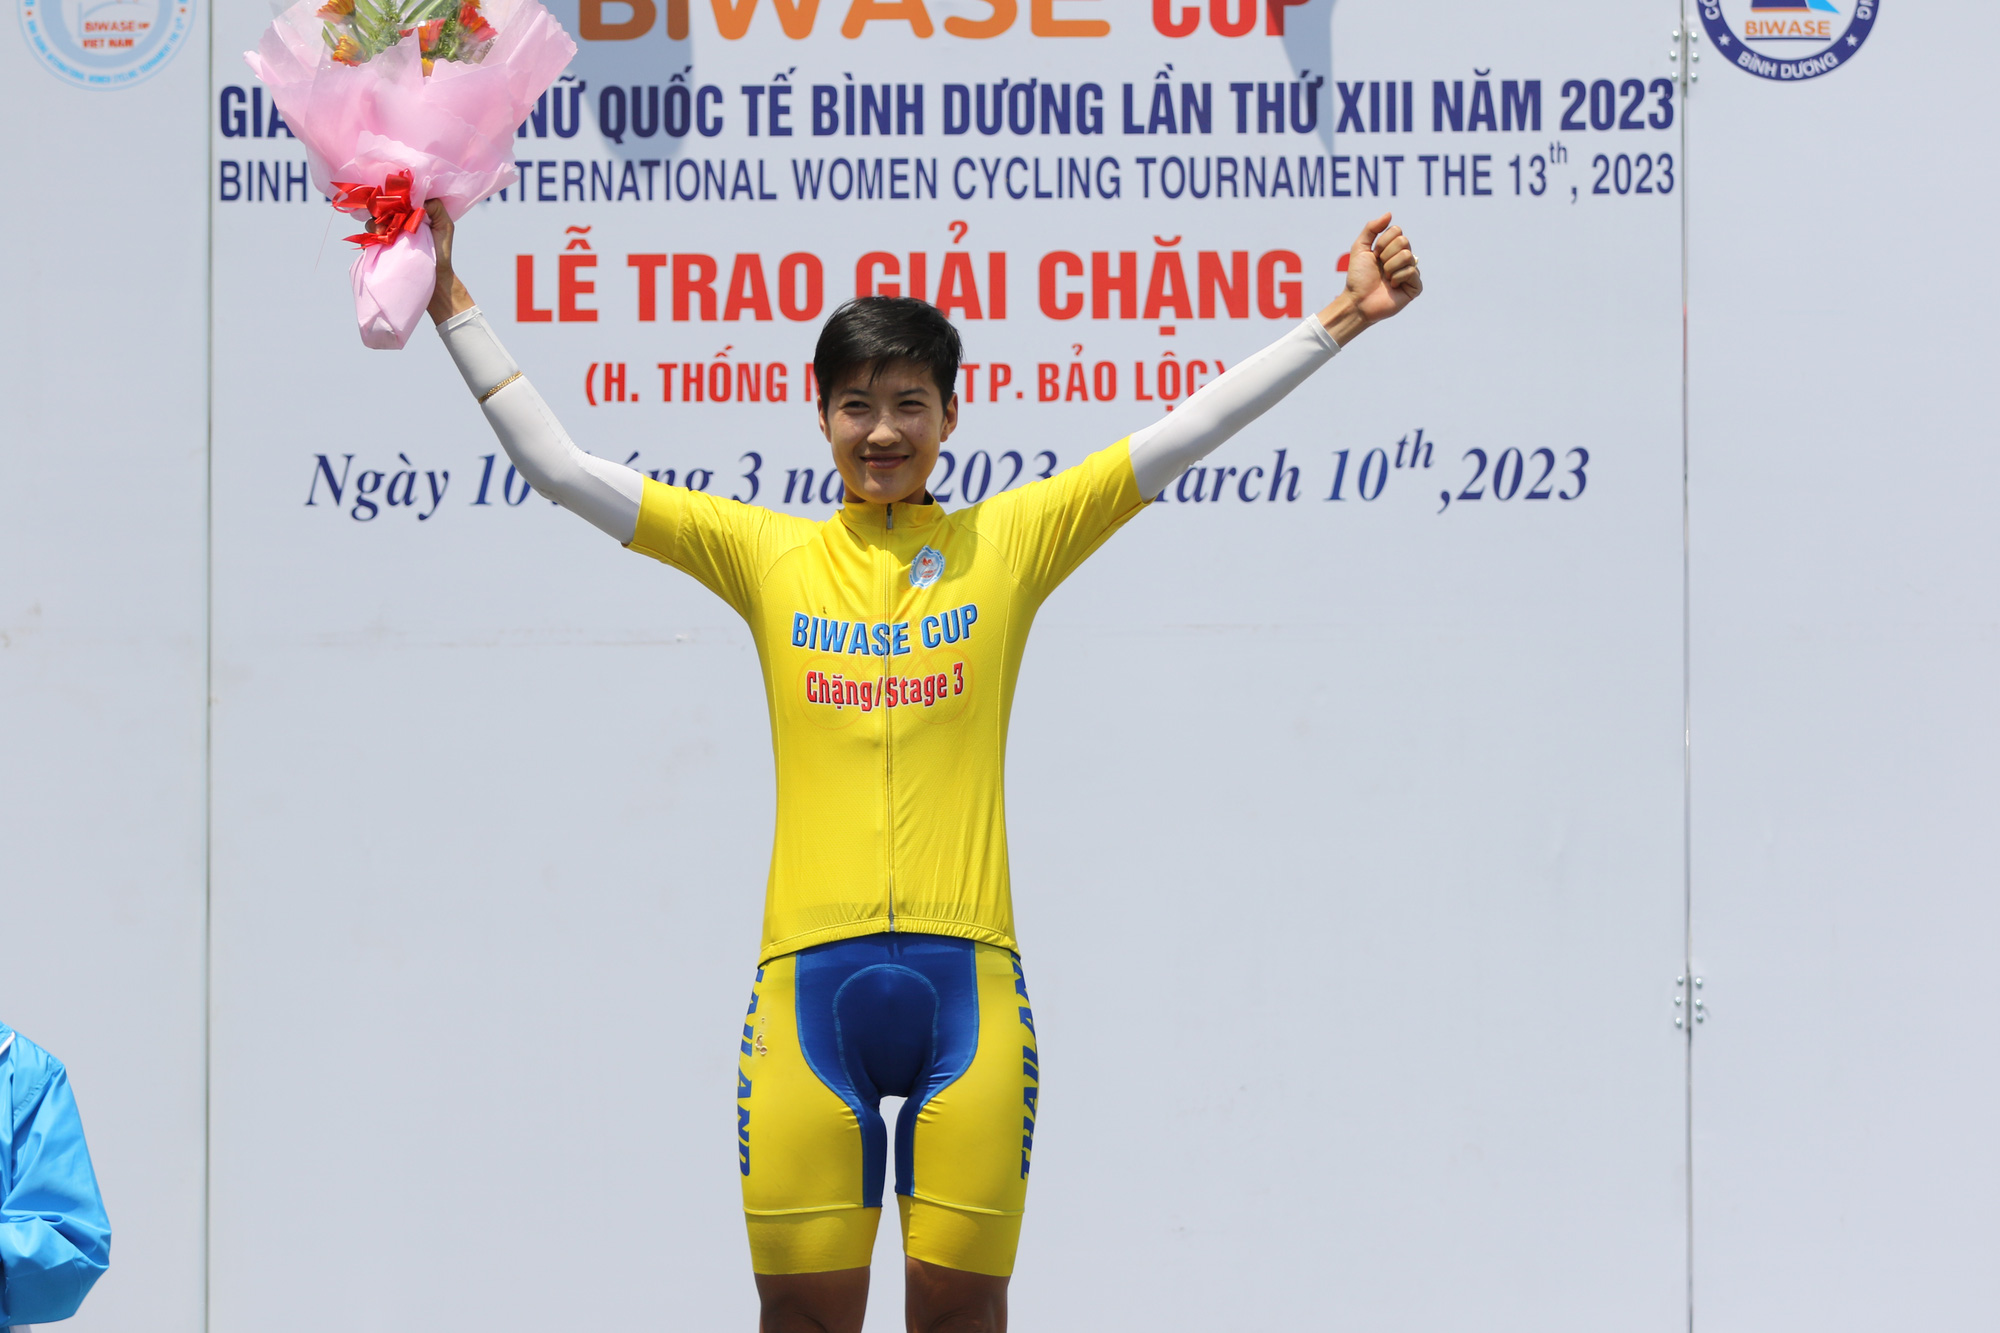 Thai cyclist Somrat Phetdarin wins the yellow jersey after the third stage of the Binh Duong International Women's Cycling Tournament - Biwase Cup 2023, March 10, 2023. Photo: T.P. / Tuoi Tre